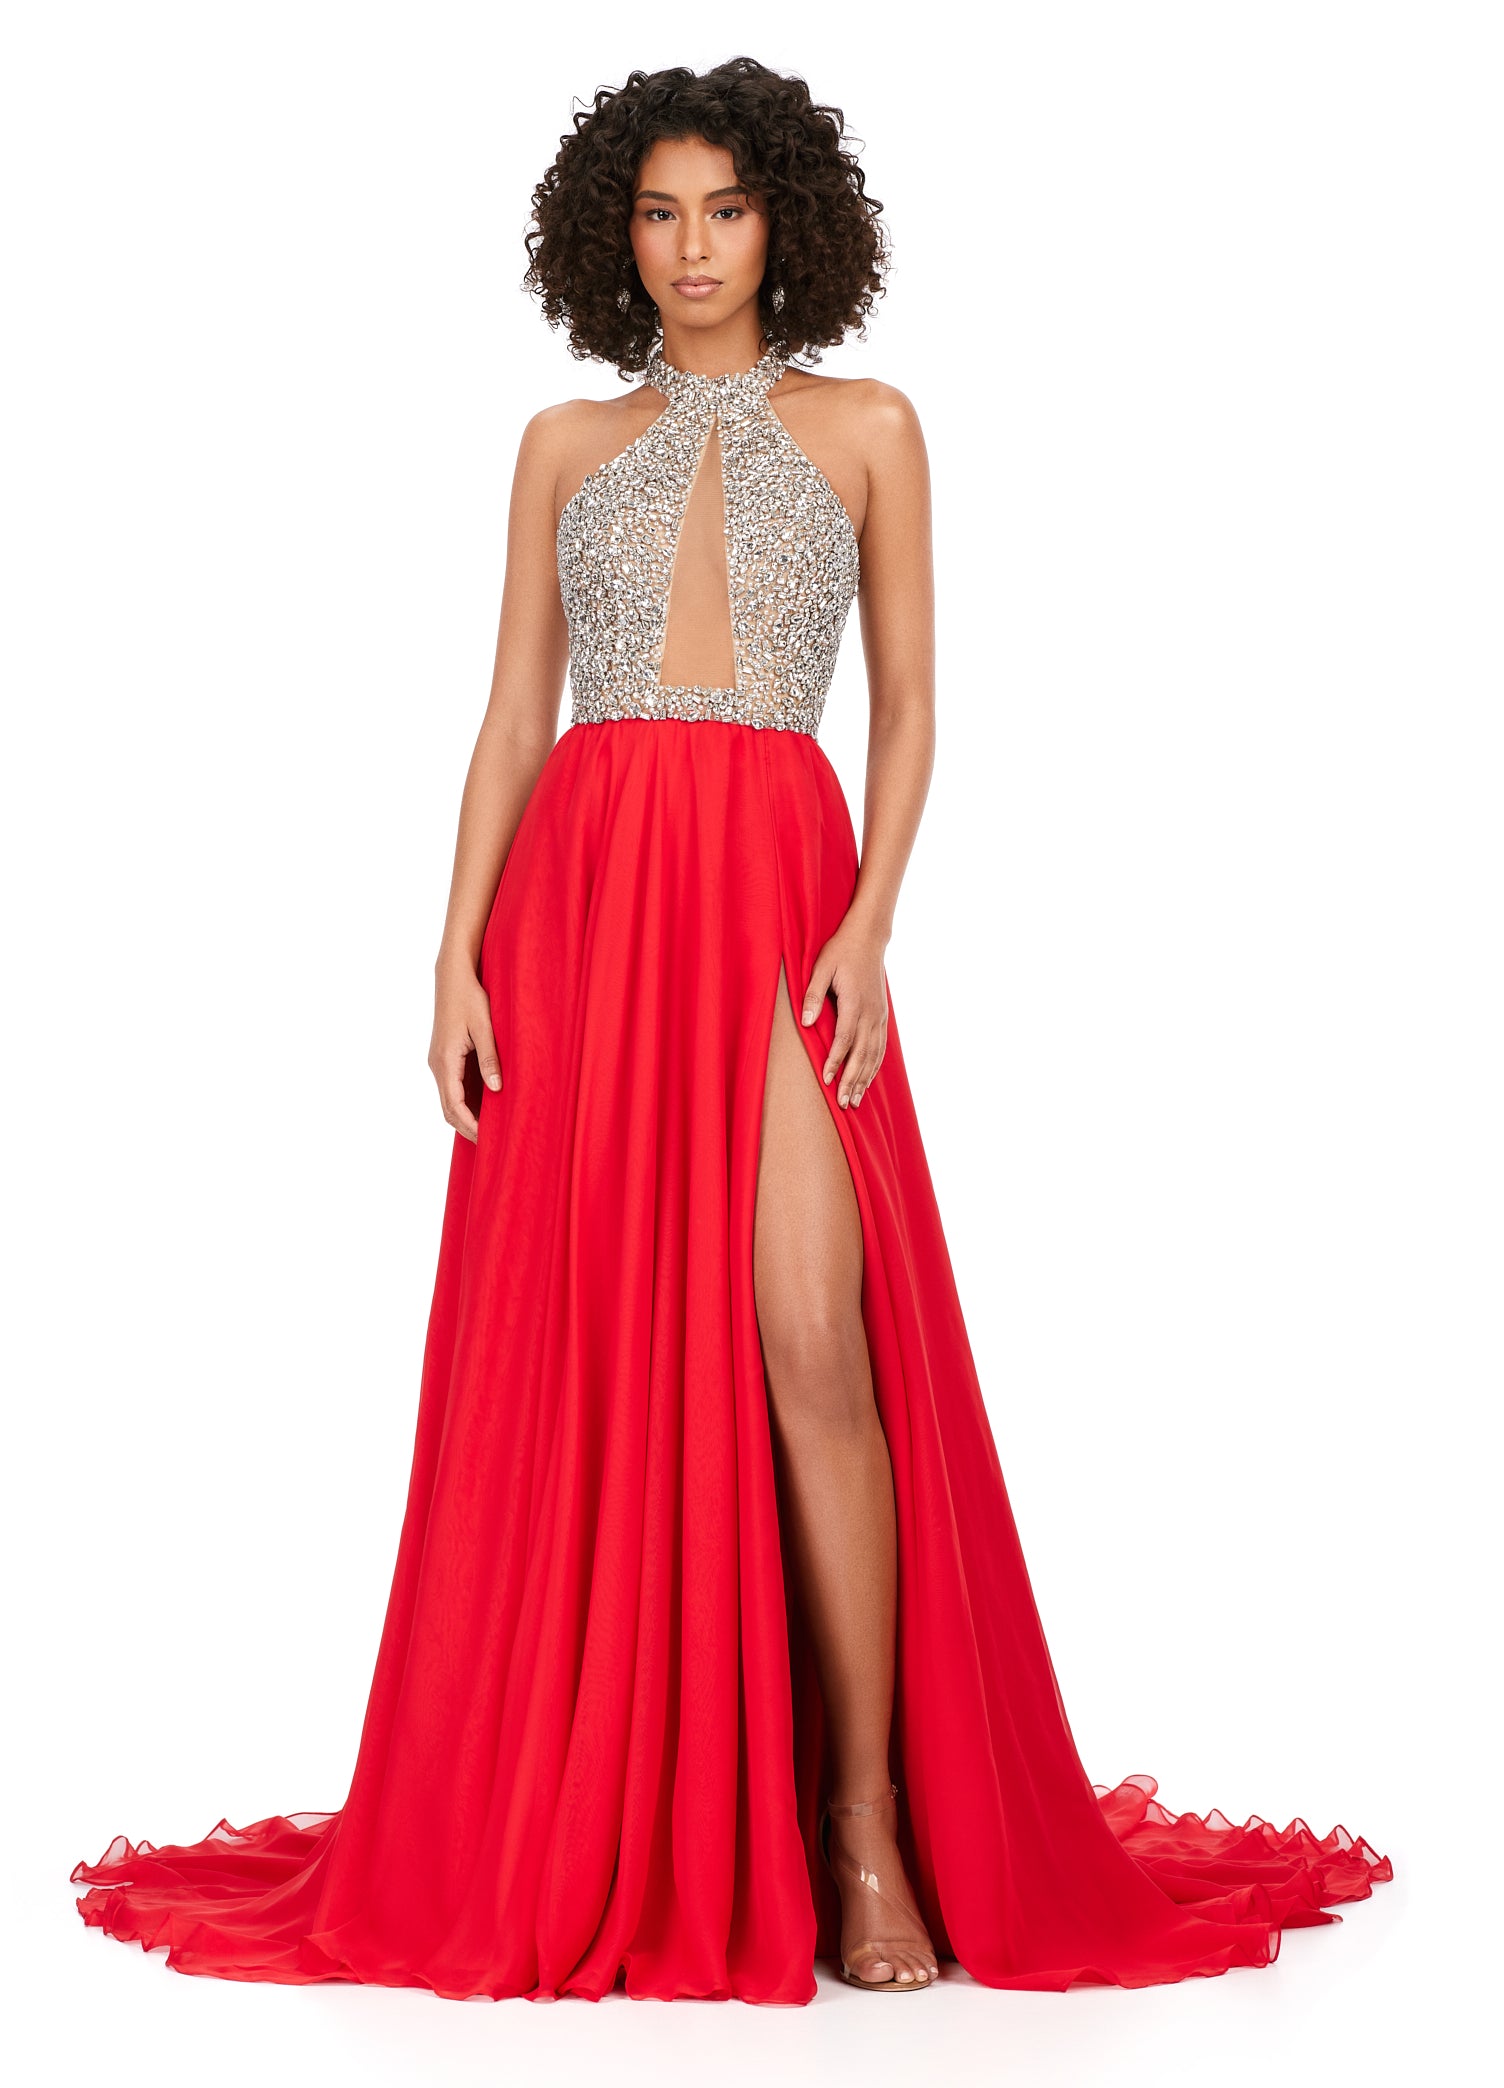 Ashley Lauren 11248 Chiffon Crystal Gown Beaded Bustier Maxi Slit Cross Back Halter Neckline A-Line Formal Dress. This chiffon A-line gown features a beautifully beaded halter top that is sure to shine bright at any event. The look is complete with an illusion cut out and high left leg slit.